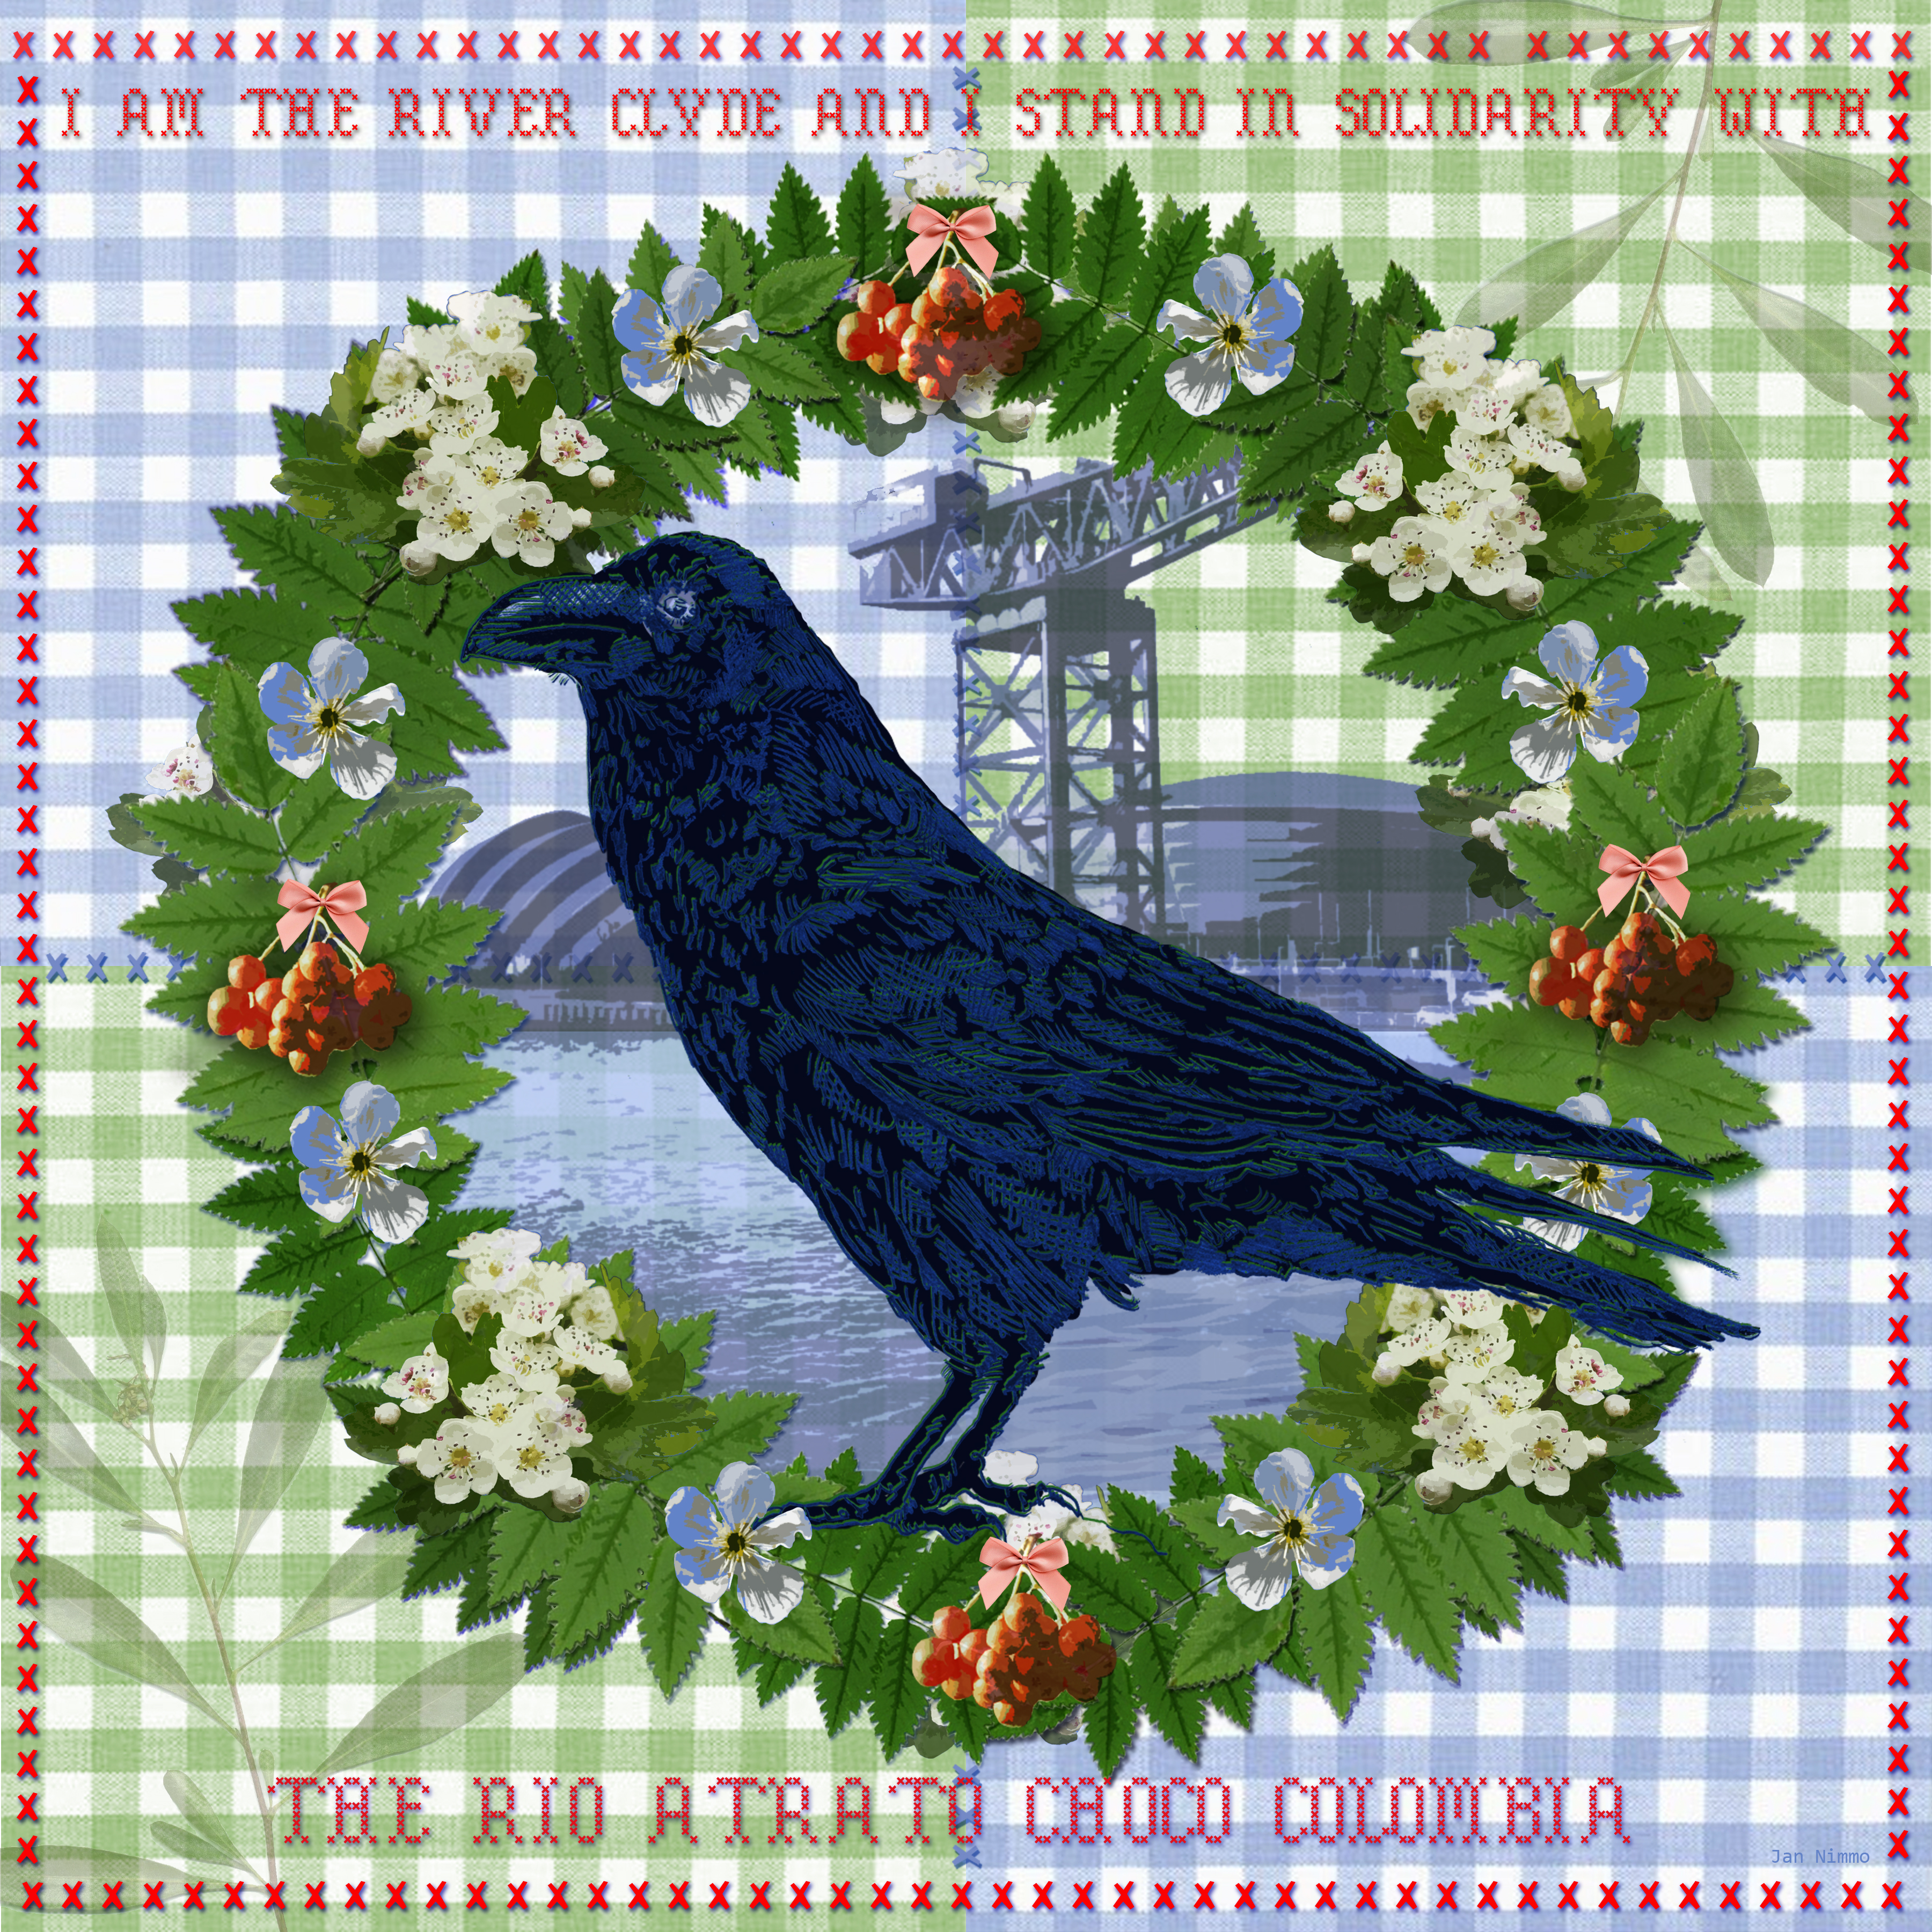 Artwork of a Raven at the Clyde